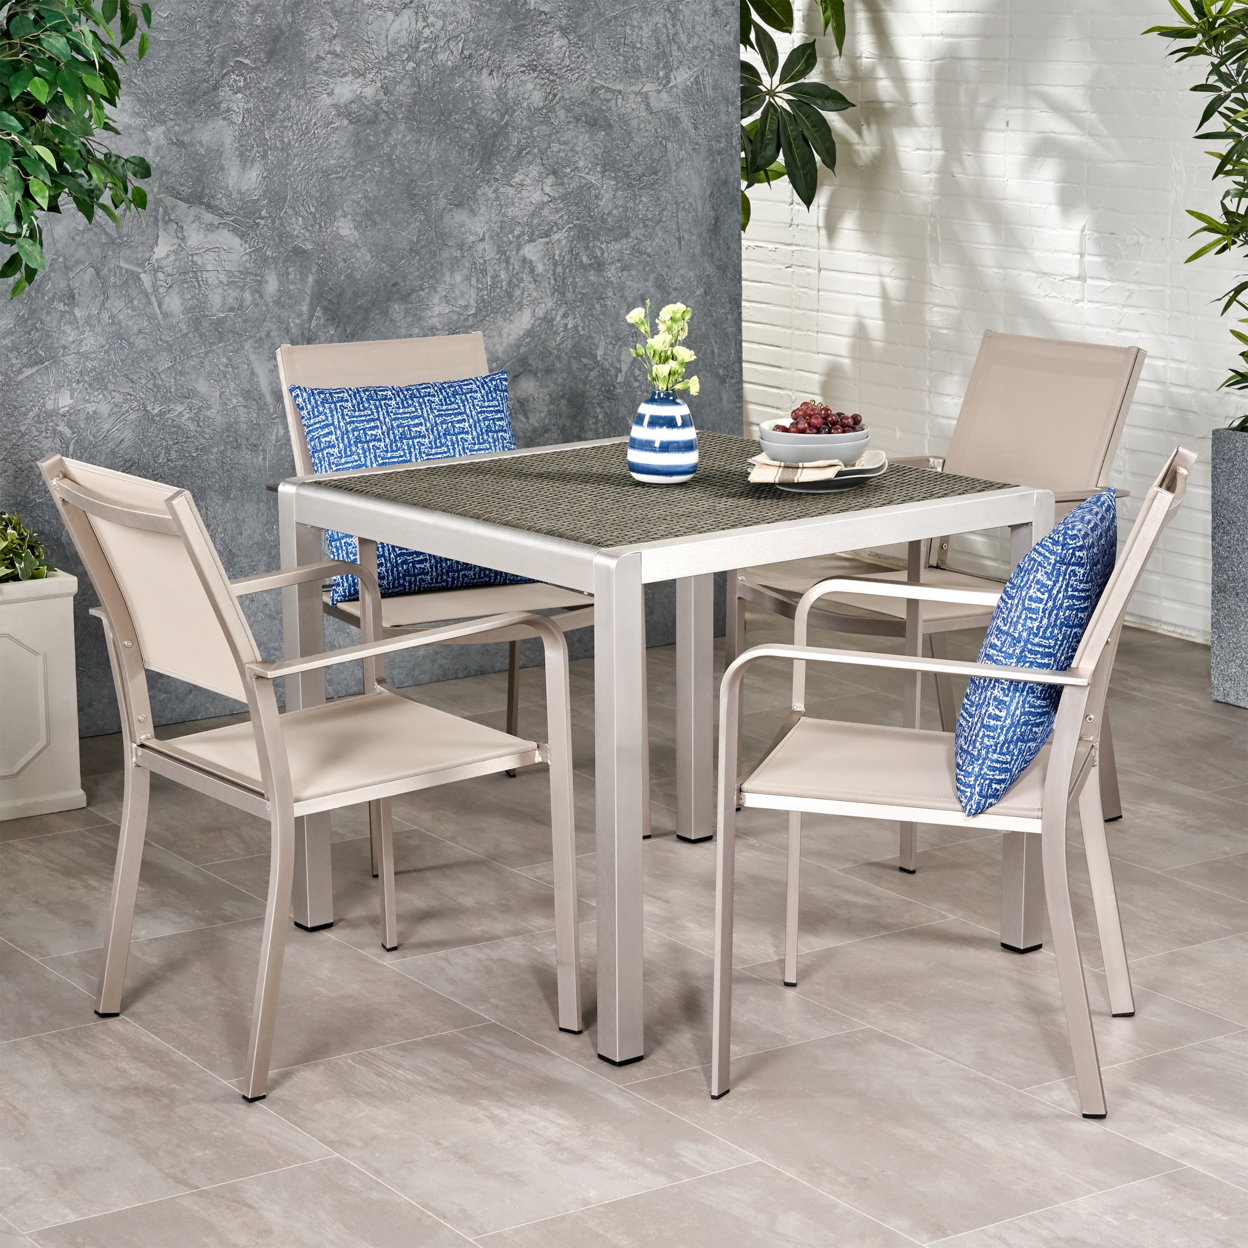 Annabelle Outdoor Modern 4 Seater Aluminum Dining Set With Faux Wood Table Top - Aluminum + Faux Wood + Outdoor Mesh